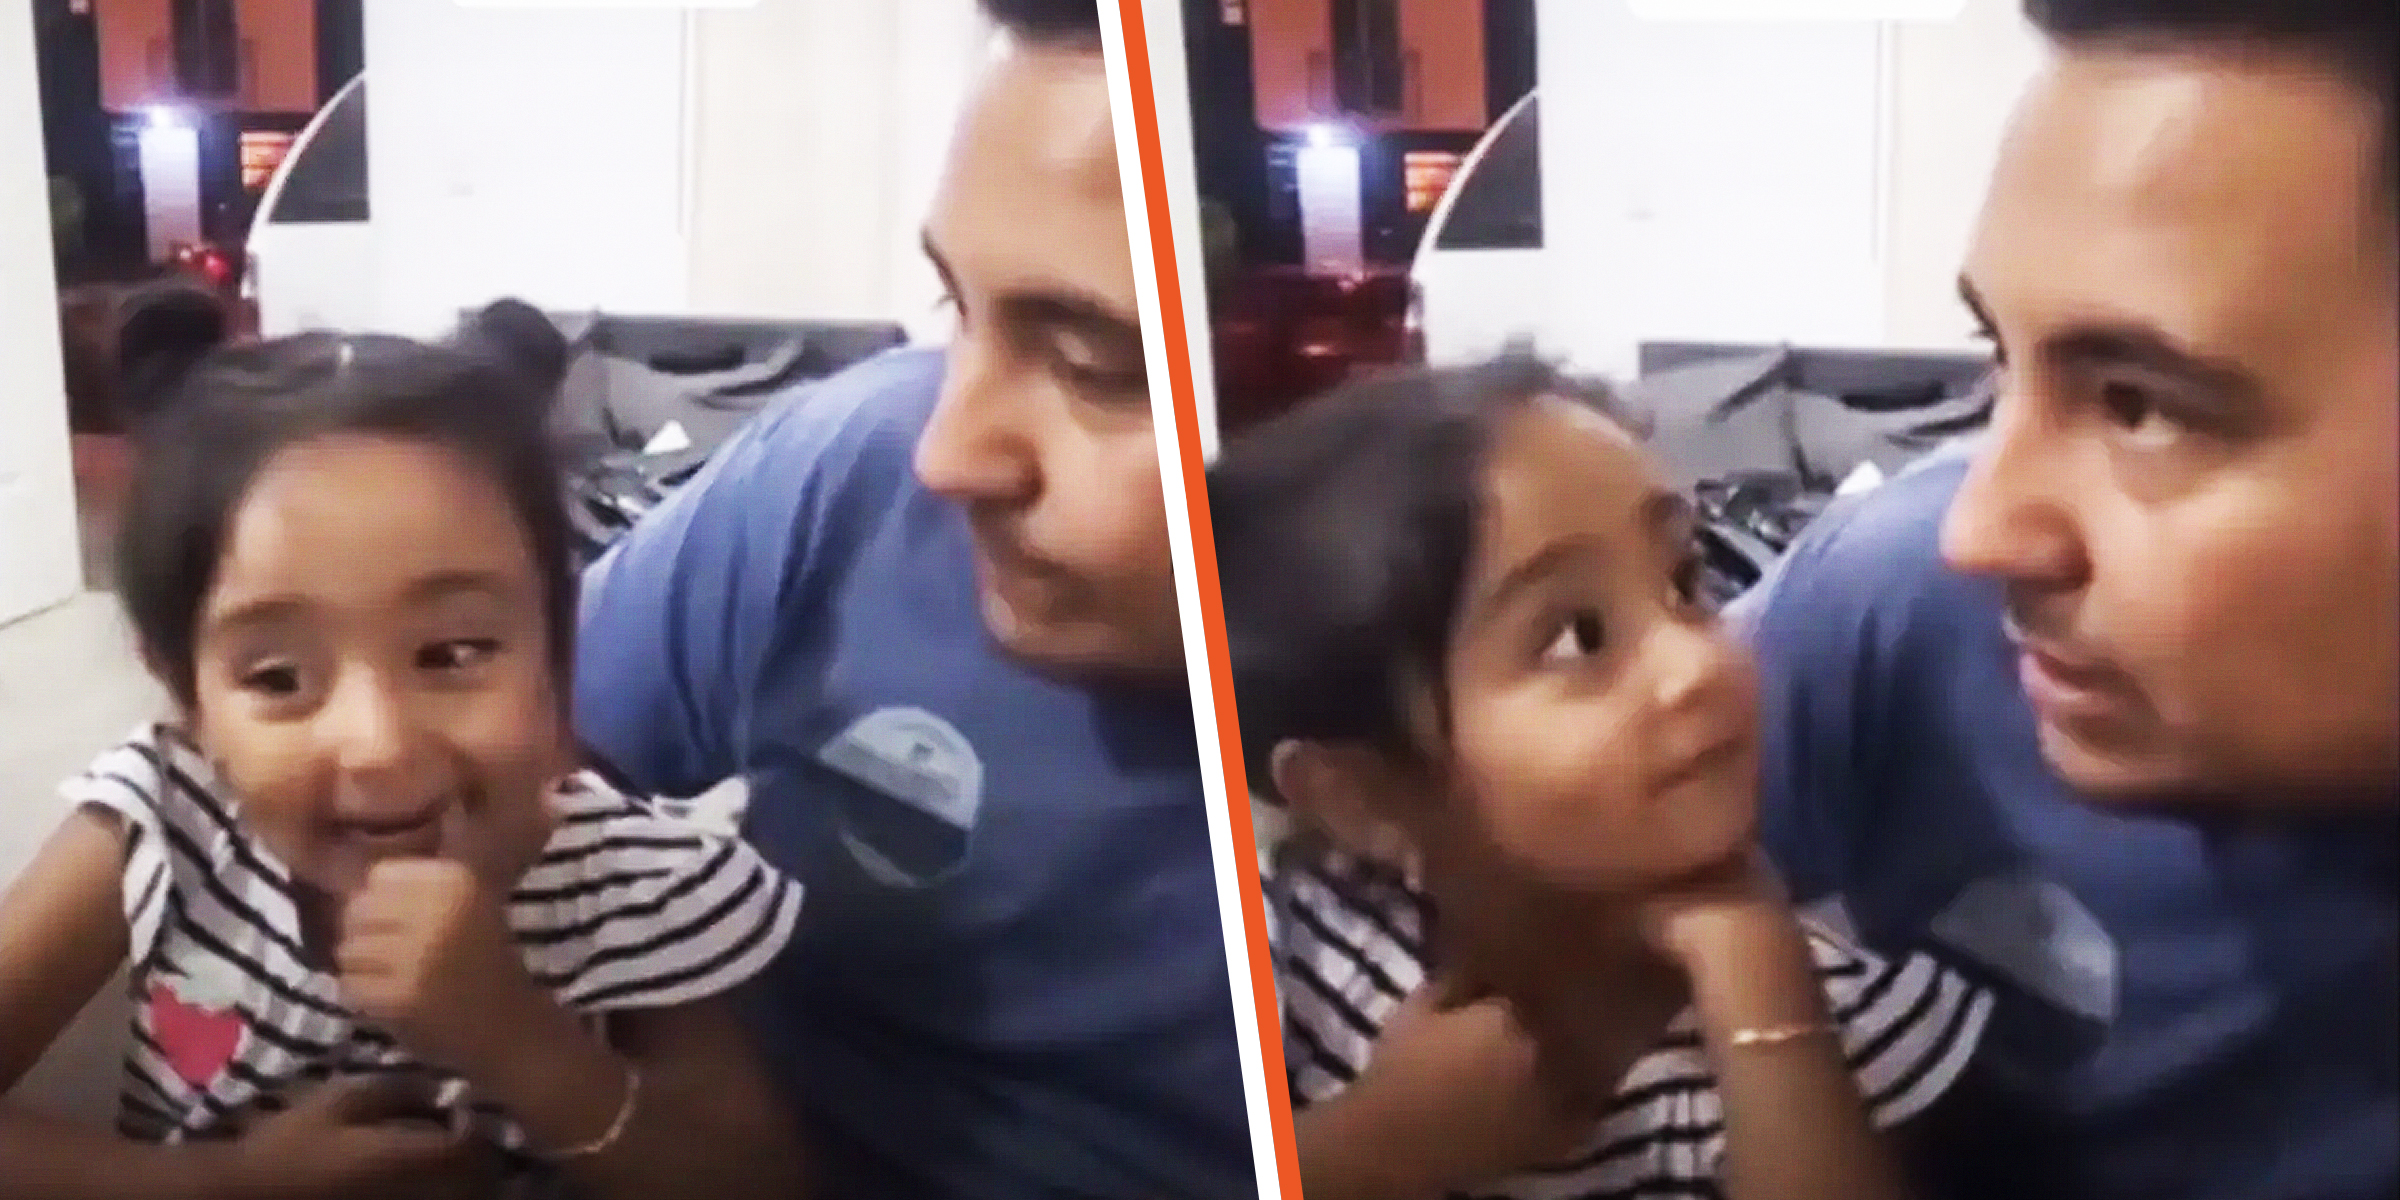 The Mexican daddy-daughter duo | Source: tiktok.com/@kaiser9278